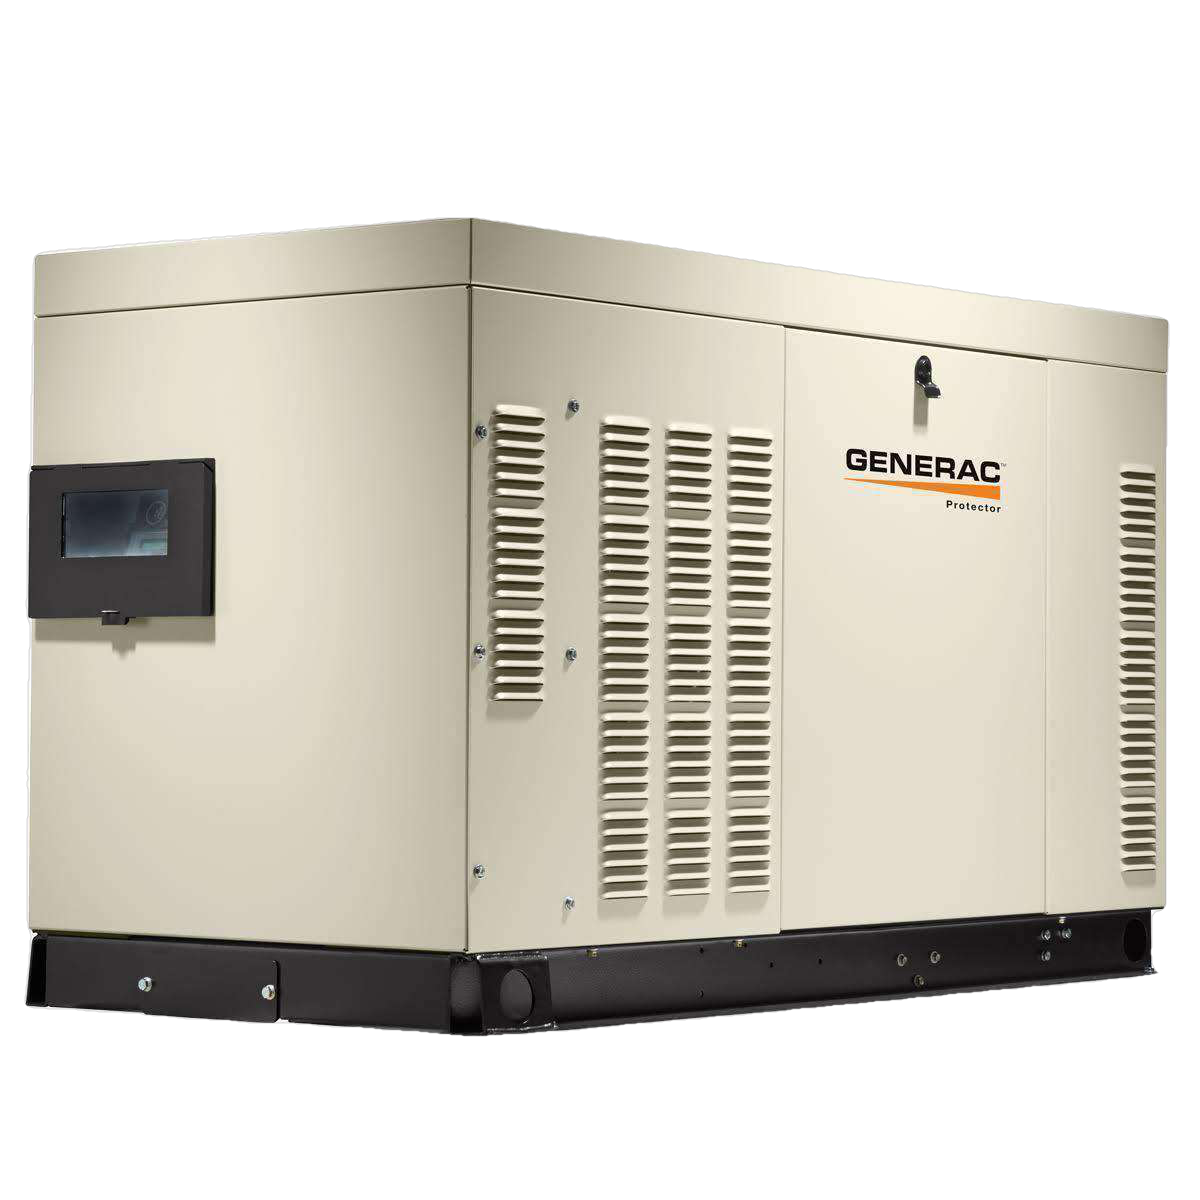 Generac, Generac Protector RG03624GNSX 36kW Liquid Cooled 3 Phase 120/208v Standby Generator New